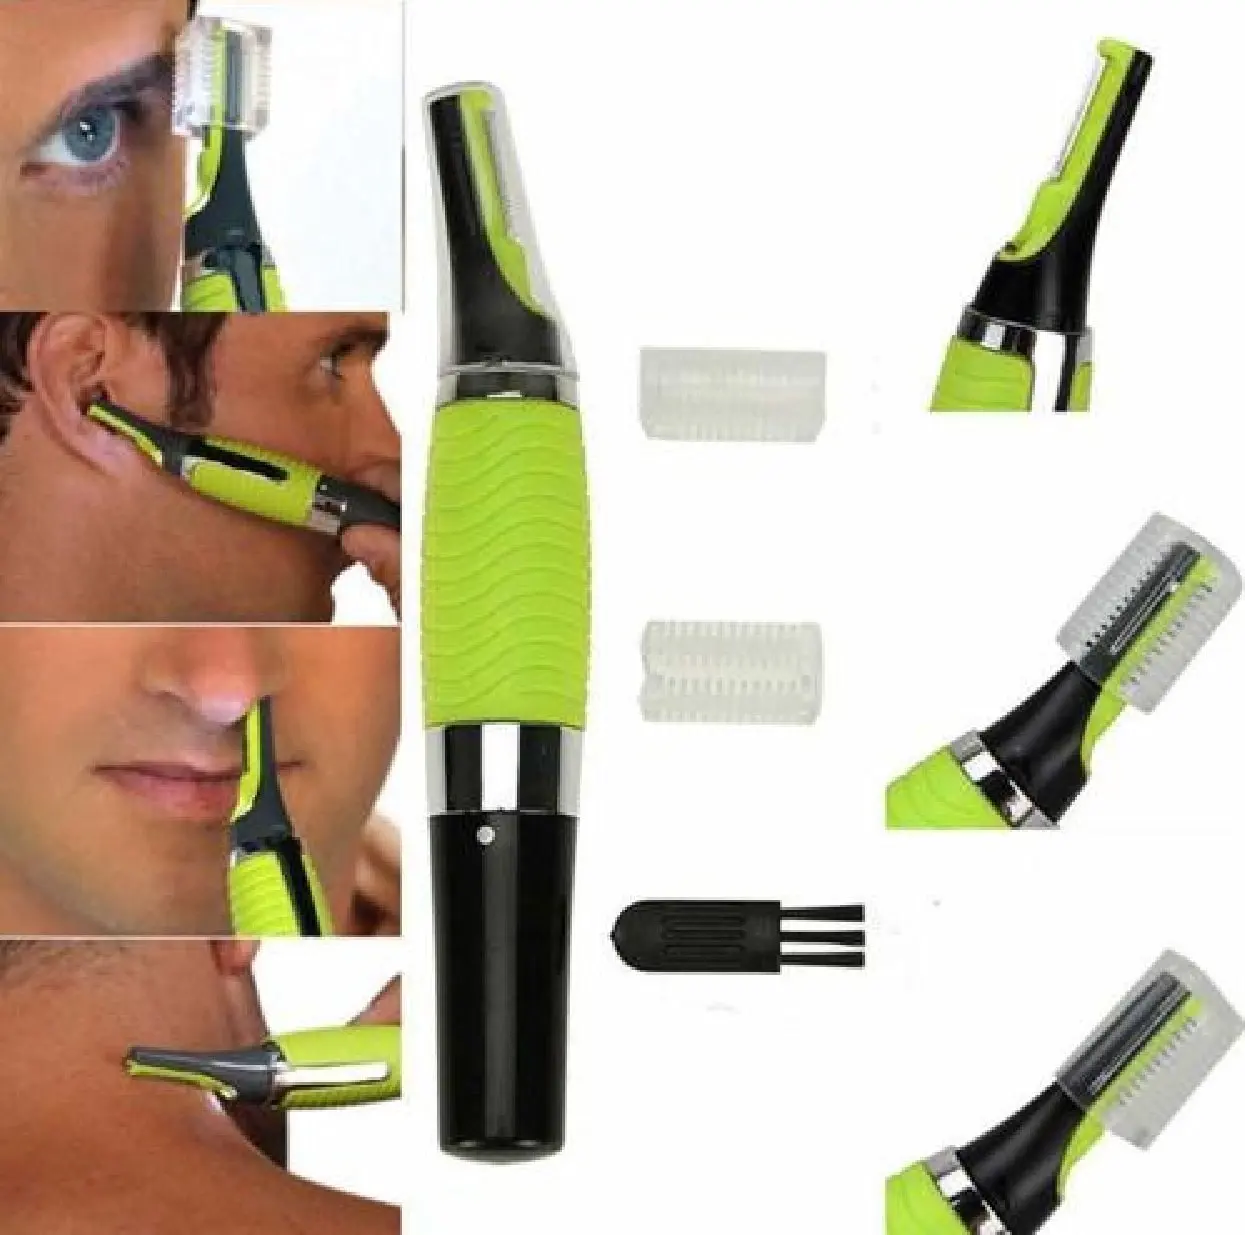 micro touches hair trimmer all in one